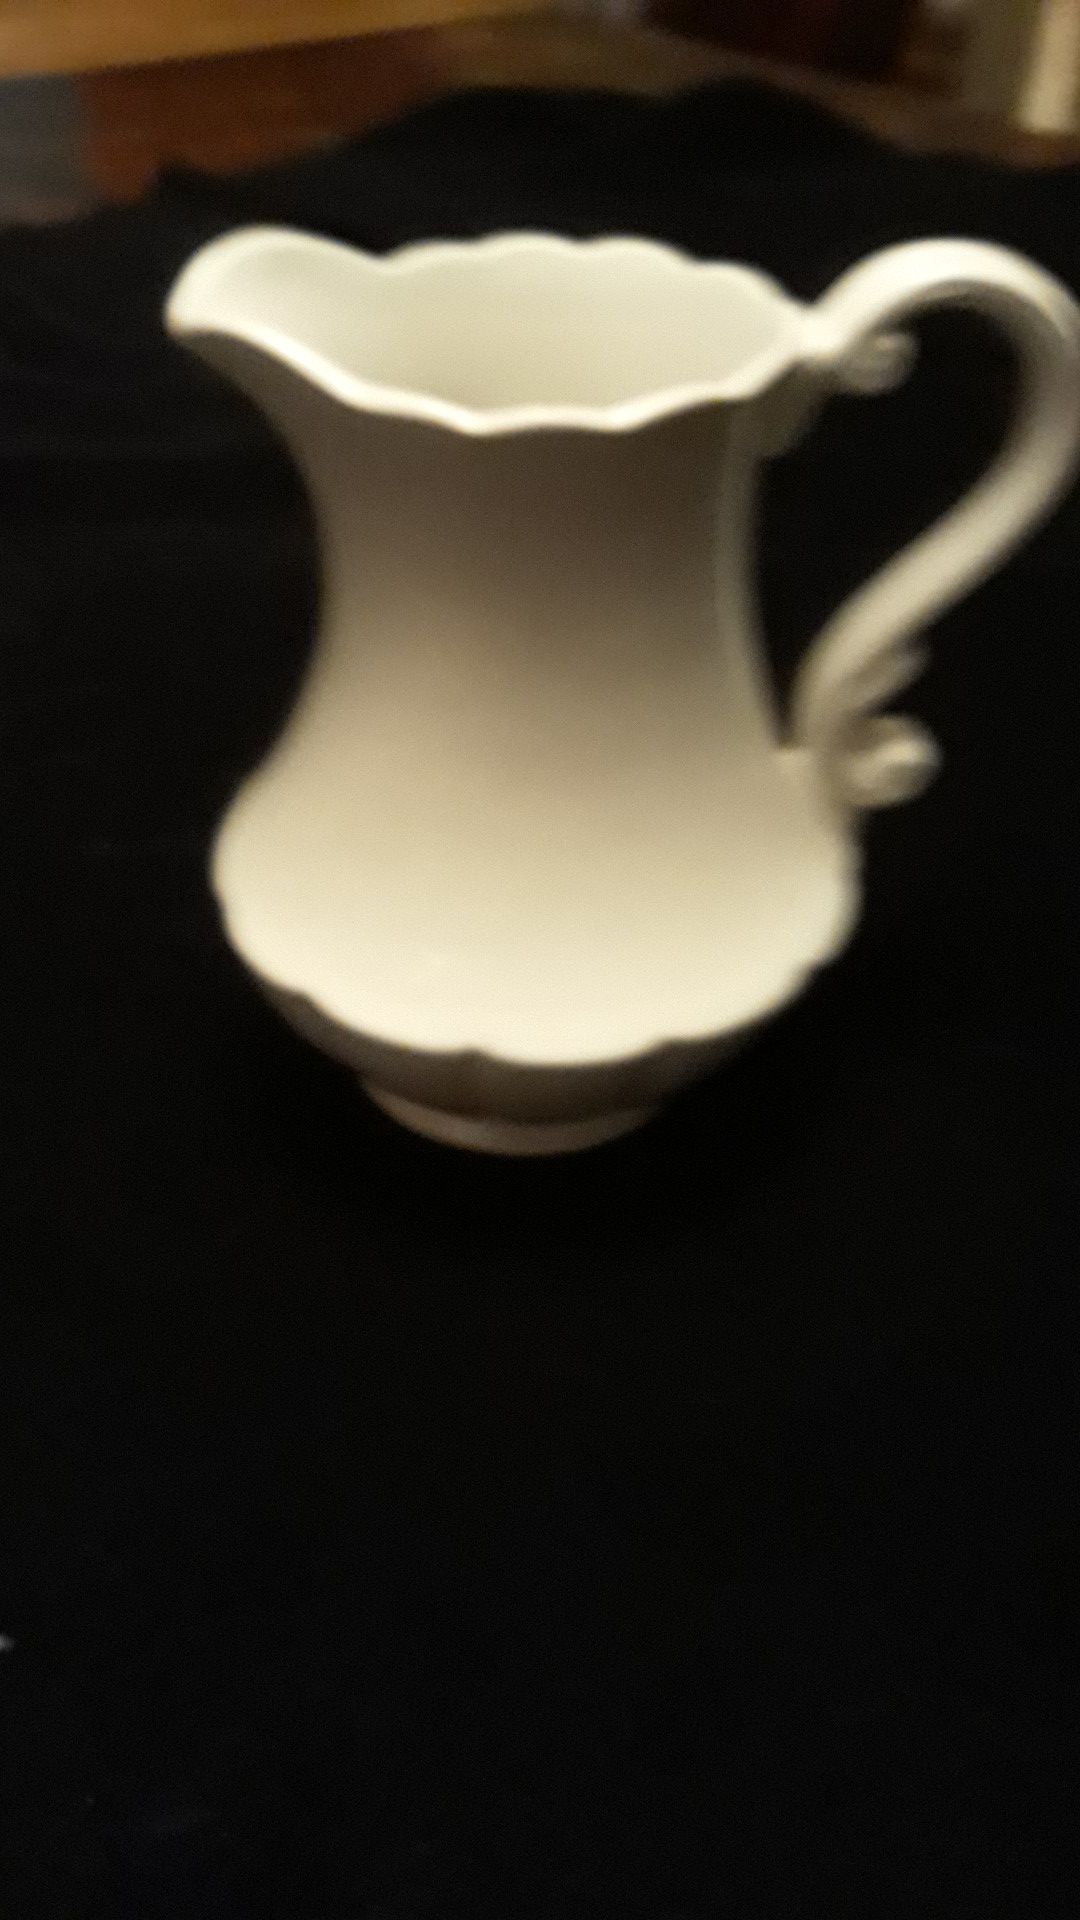 Small water pitcher